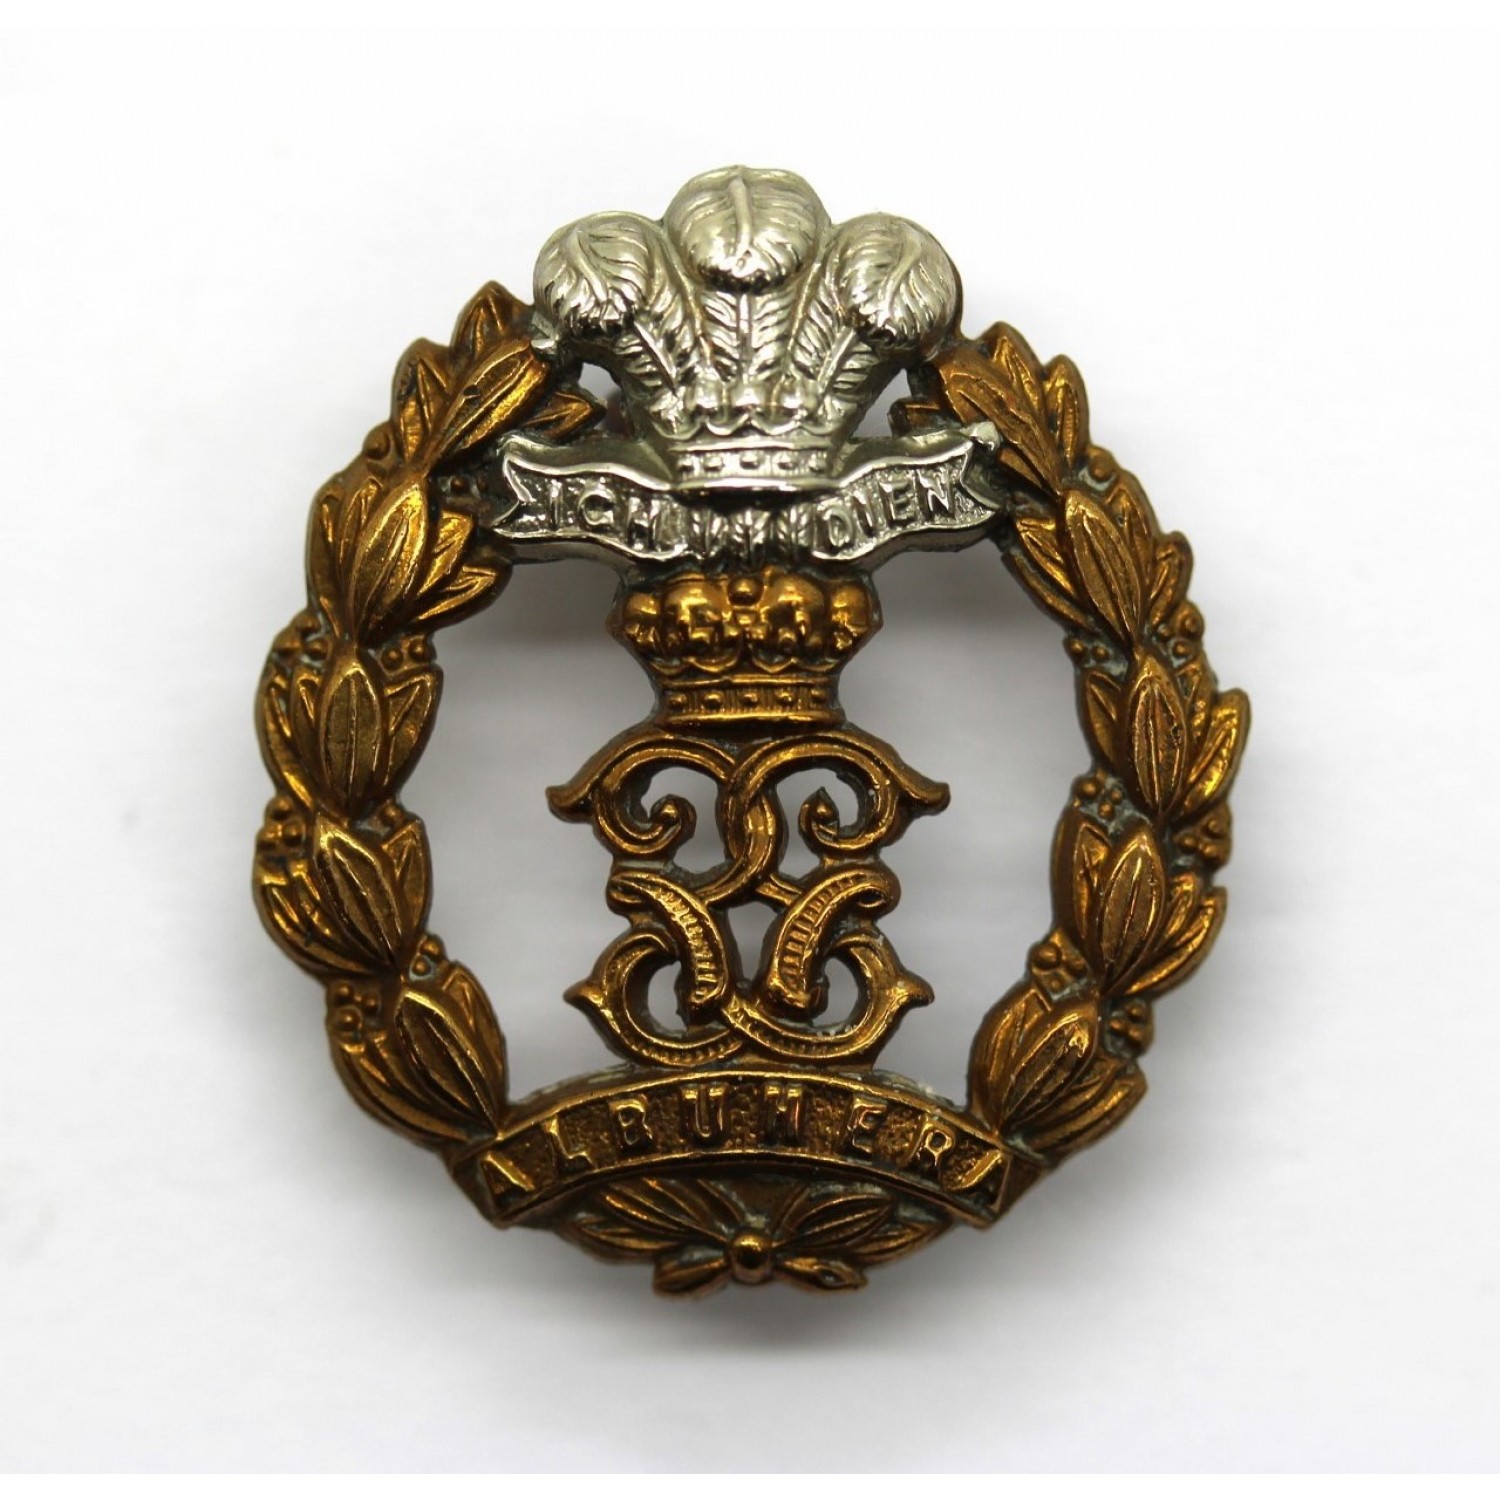 Middlesex collar badge 2